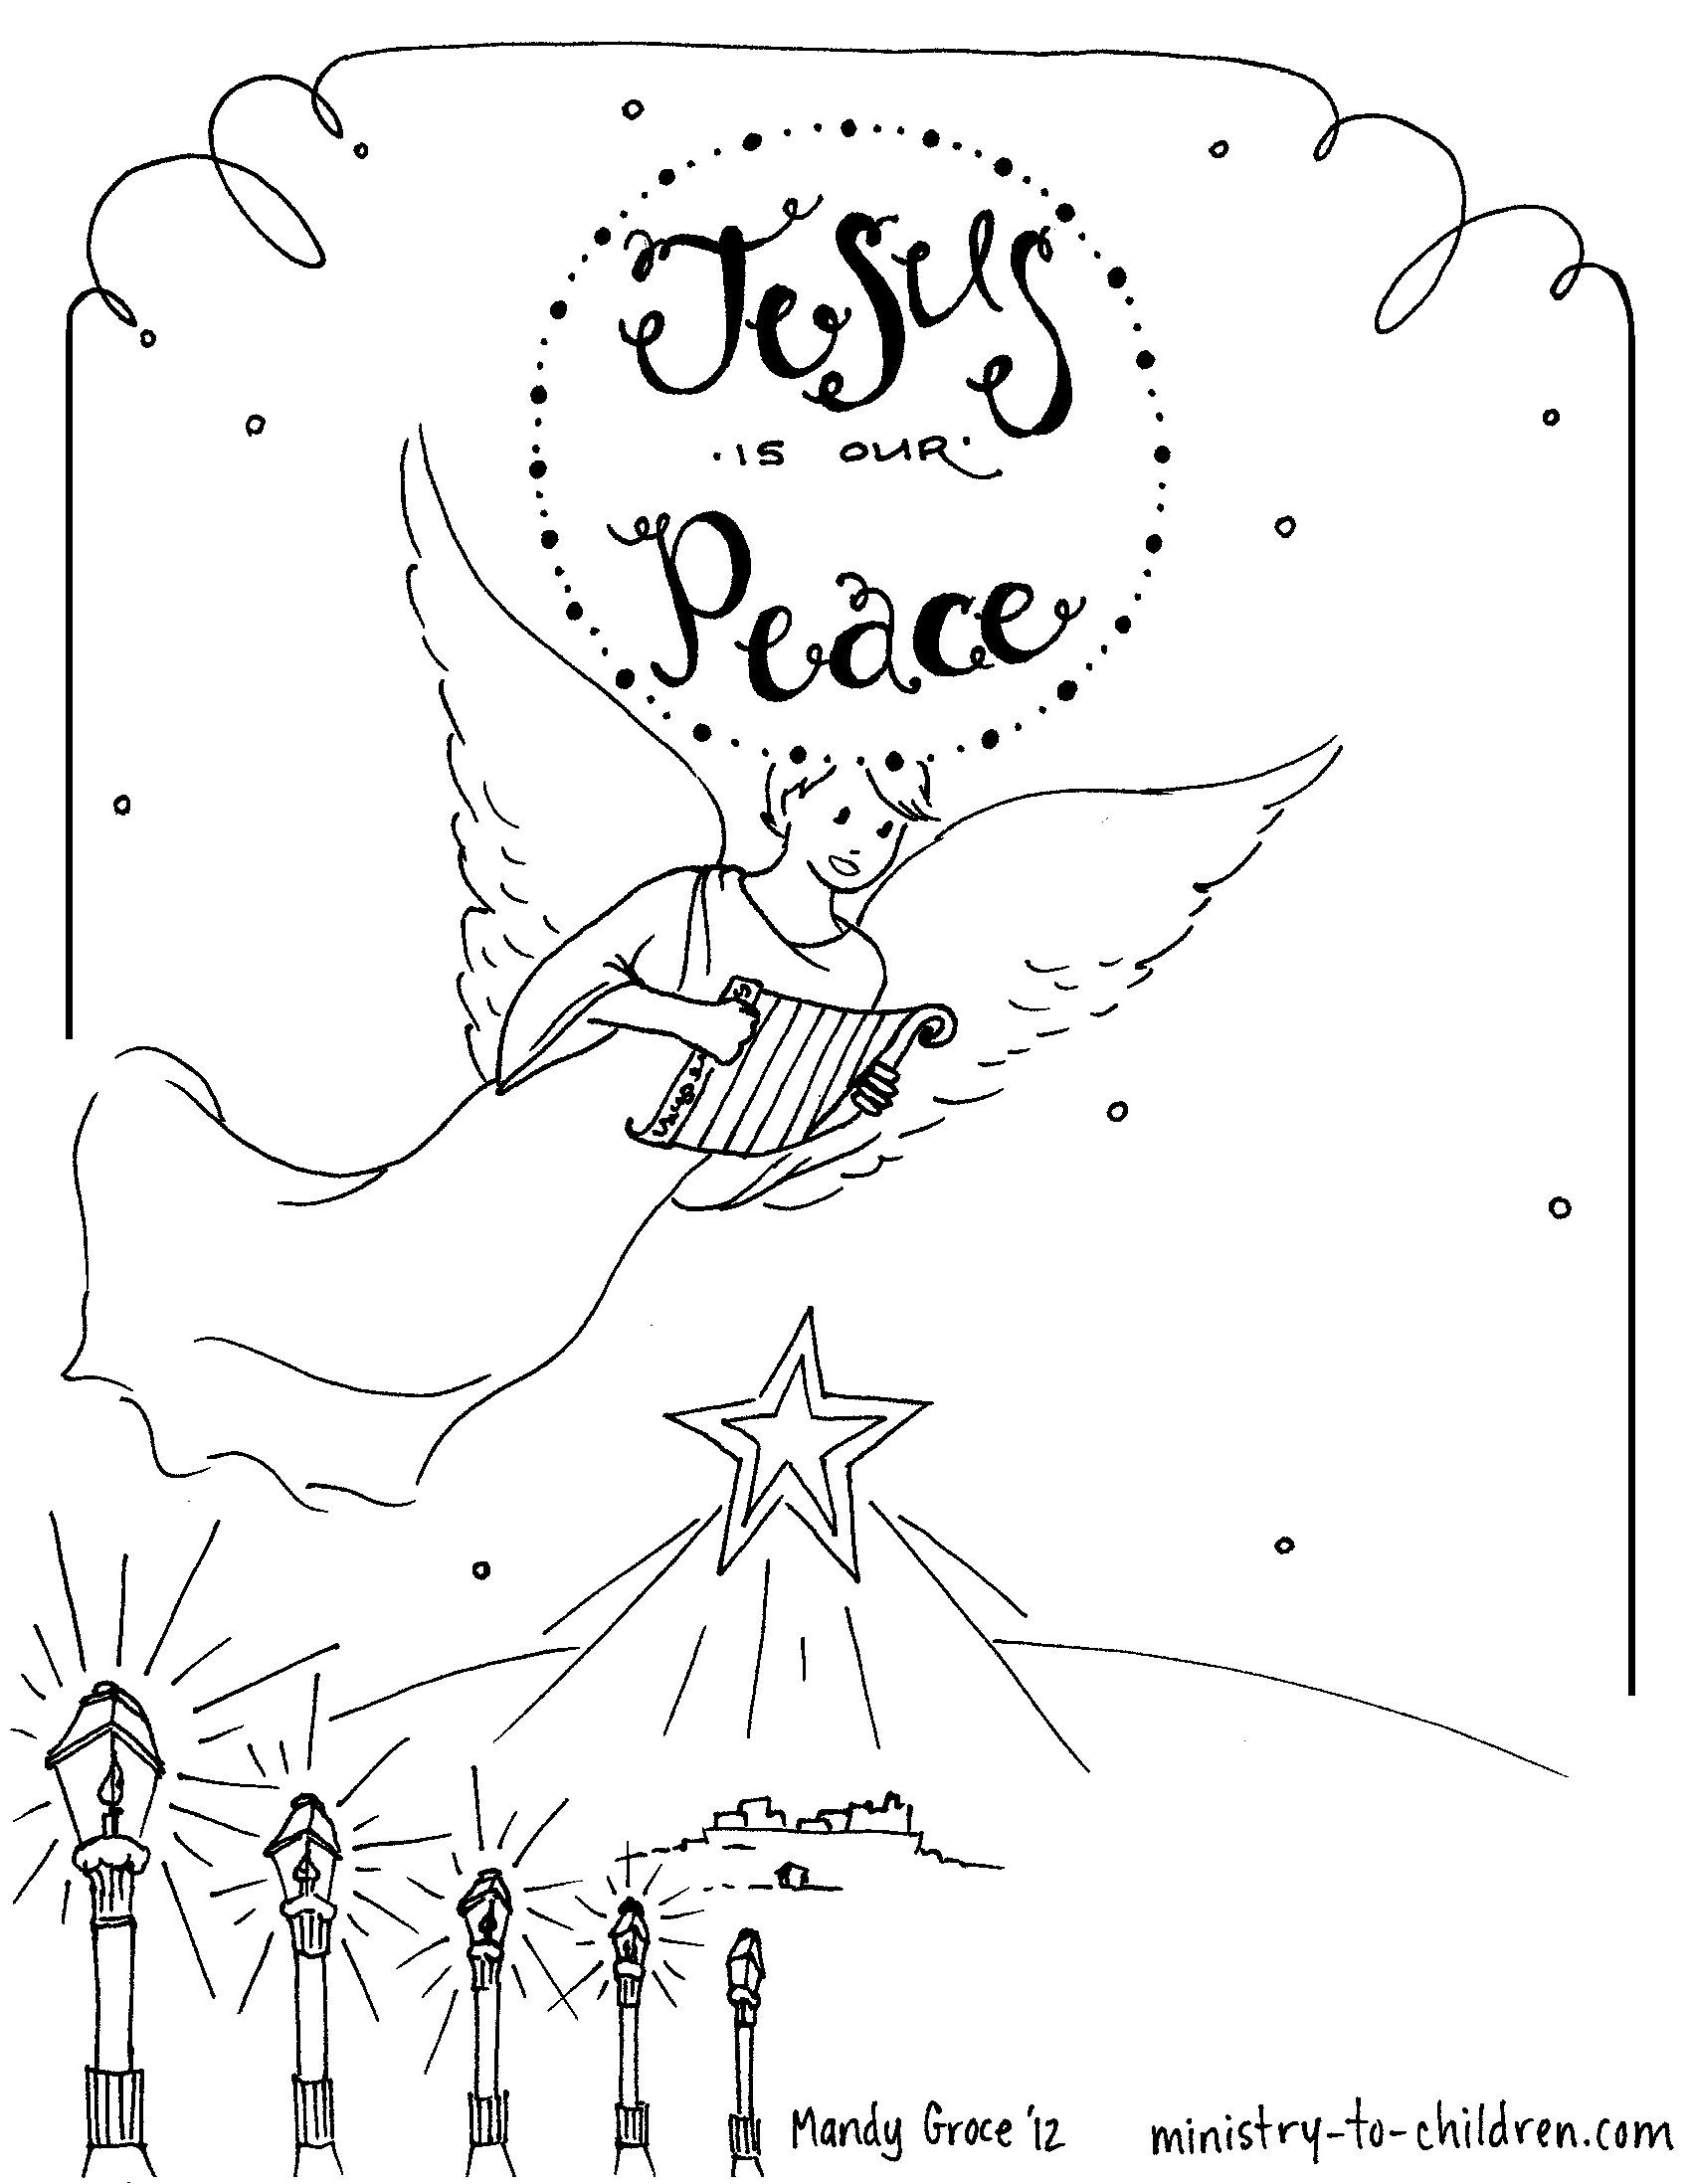 Angels Over Bethlehem Coloring Page for Christmas